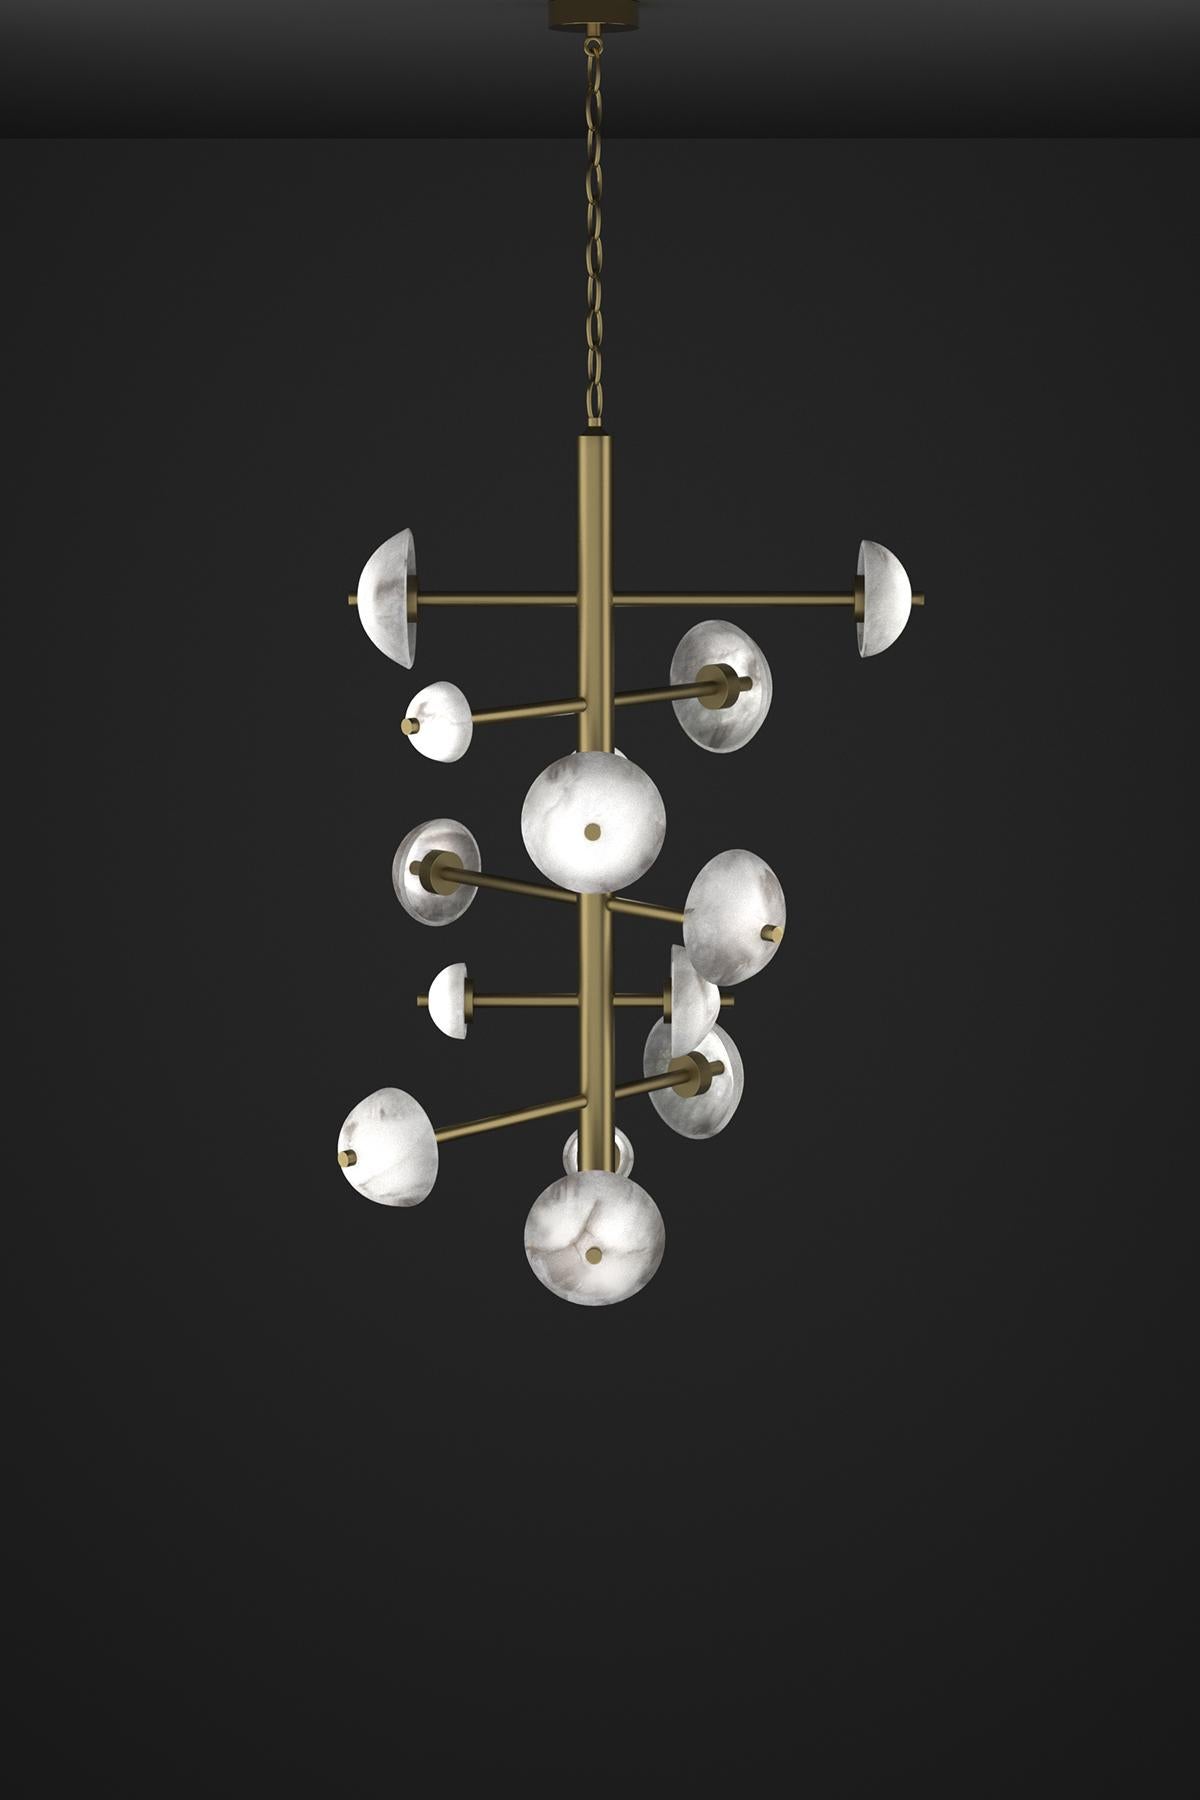 Apollo Bronze Chandelier by Alabastro Italiano
Dimensions: D 70,5 x W 55 x H 111 cm.
Materials: White alabaster and bronze.

Available in different finishes: Shiny Silver, Bronze, Brushed Brass, Ruggine of Florence, Brushed Burnished, Shiny Gold,